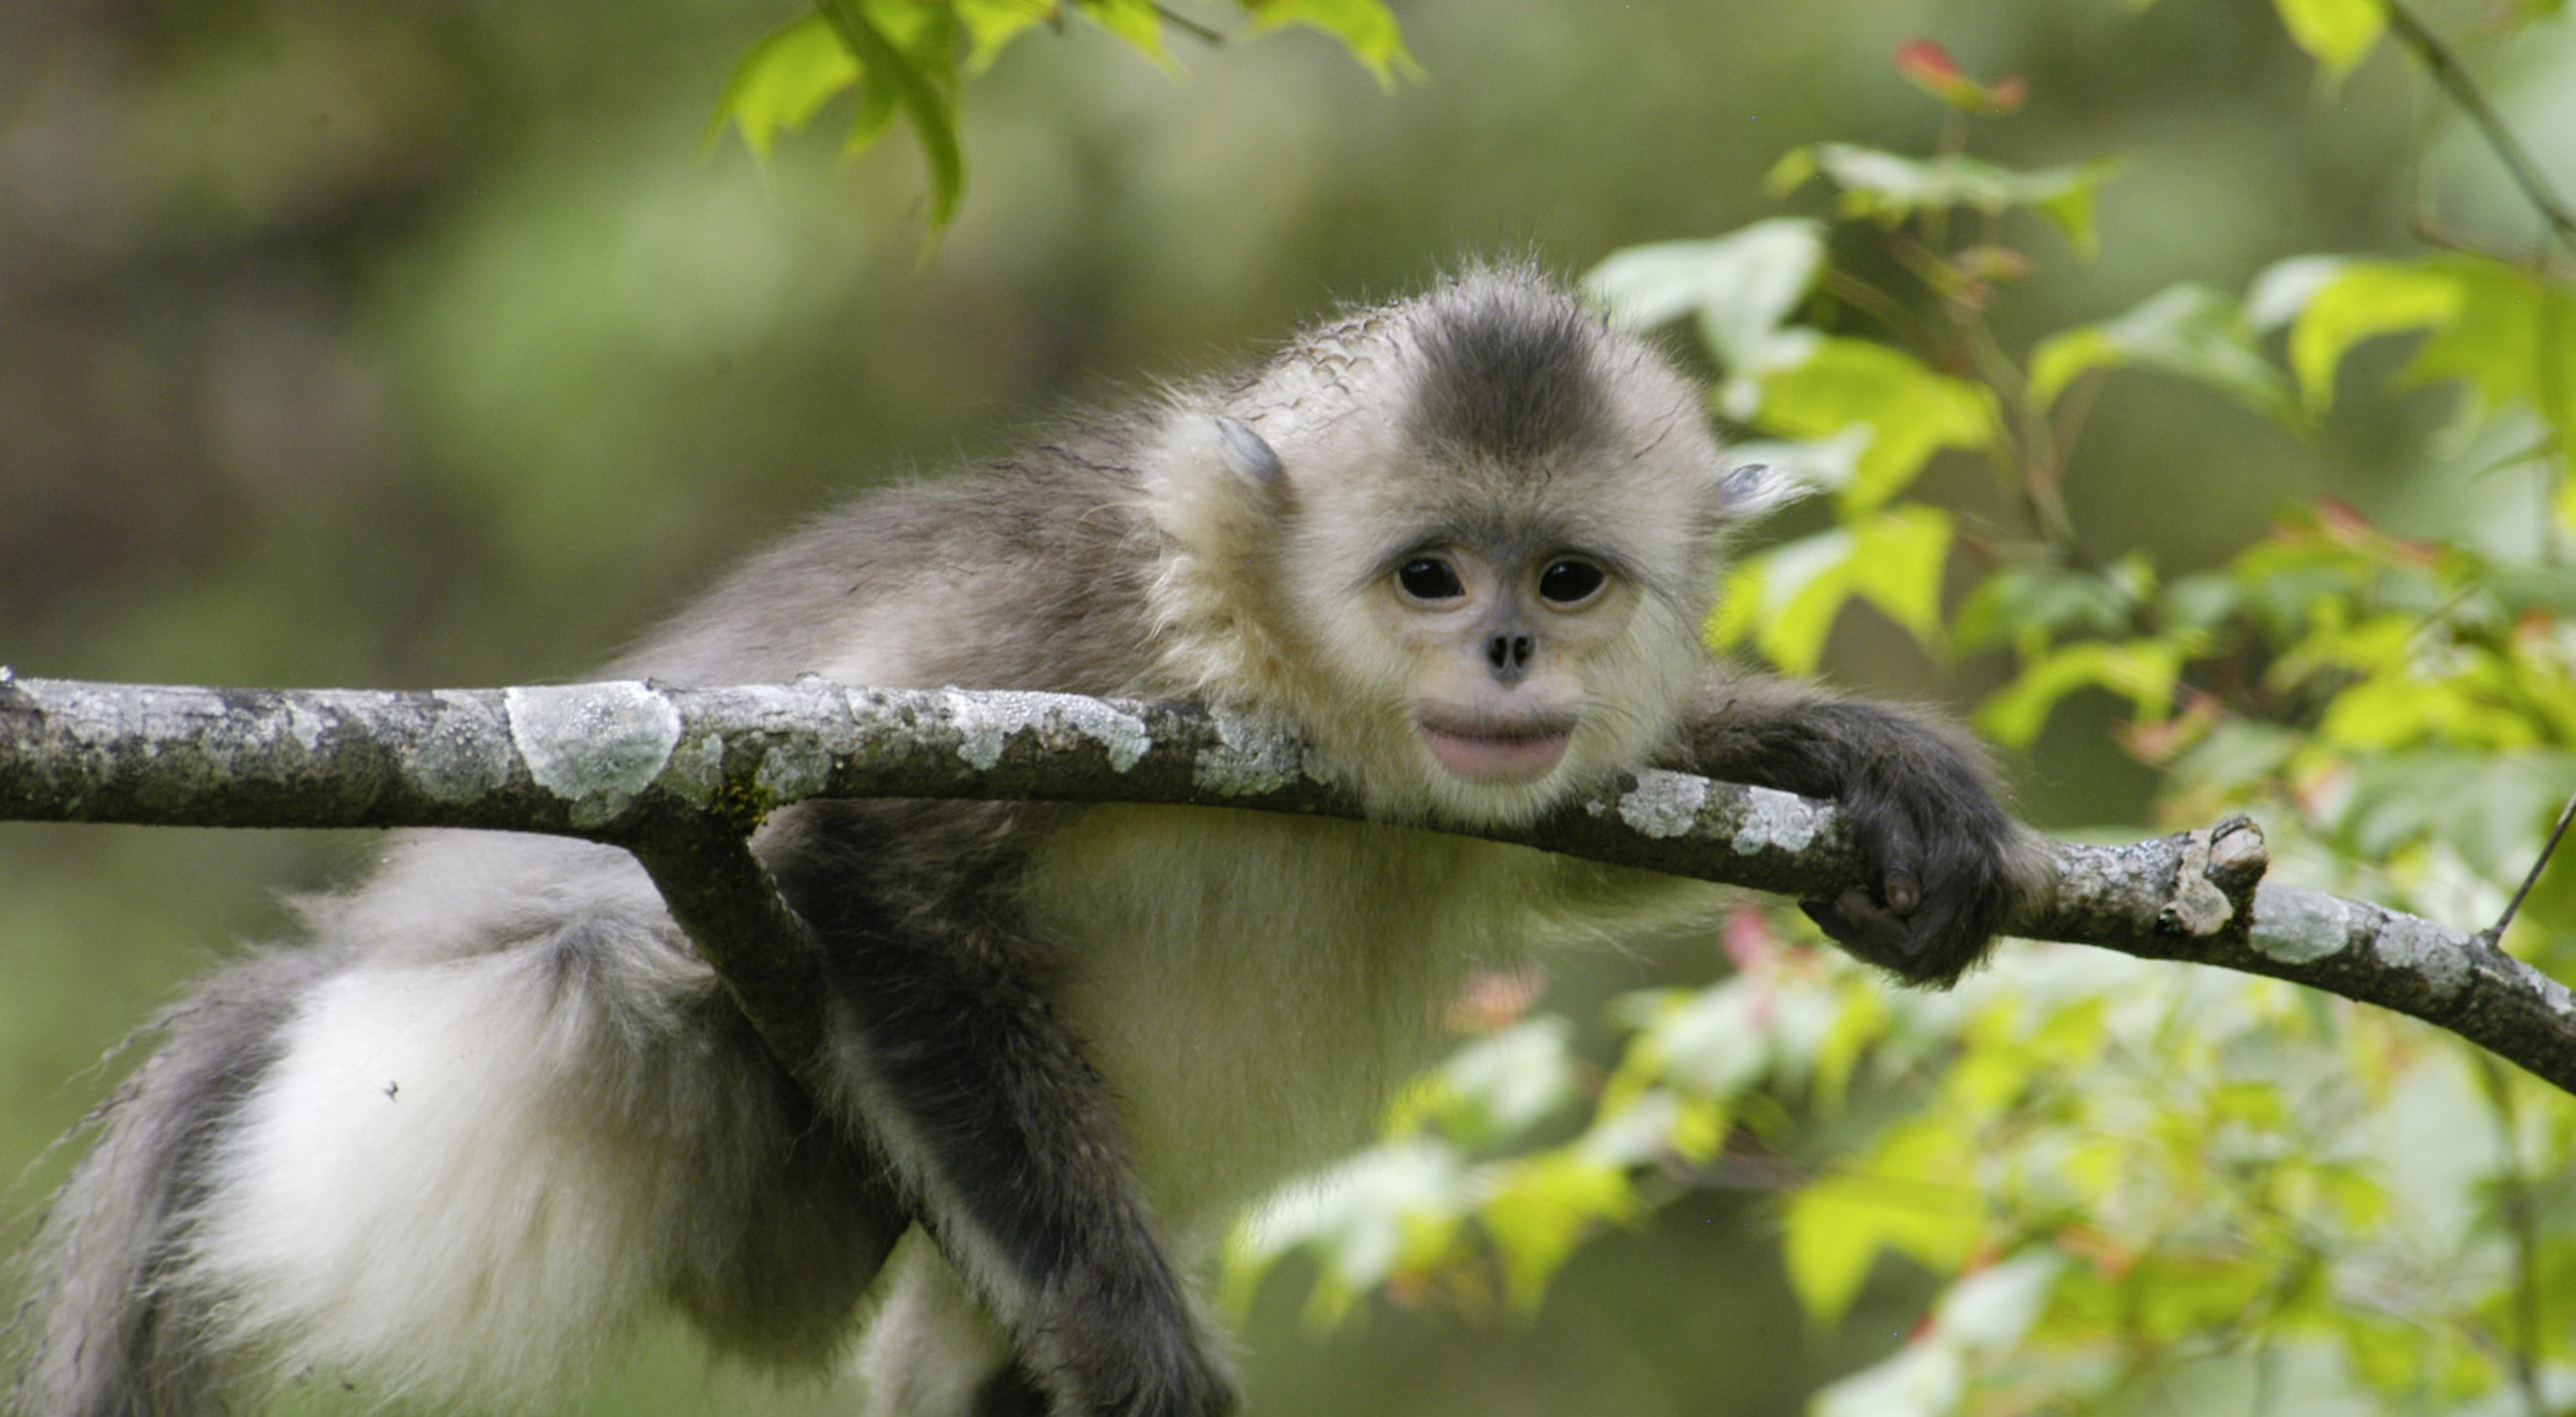 Photos: The Mysterious Chinese Monkey That's 'as Endangered as the Panda